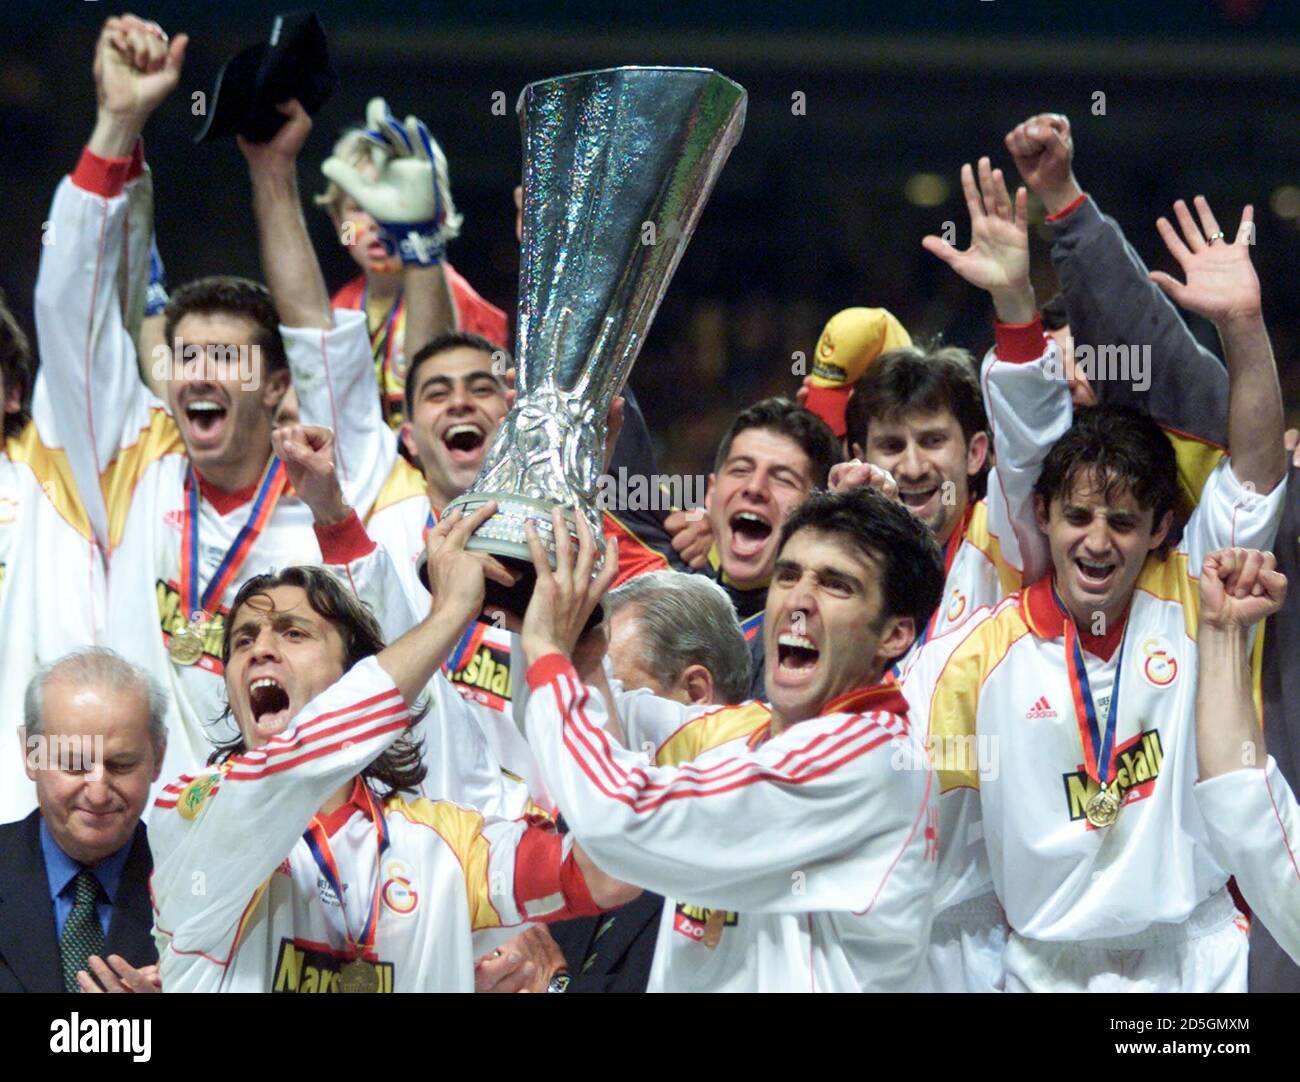 Galatasaray's Hakan Sukur (2R lower) holds the UEFA Cup as Galatasaray  celebrate winning the UEFA Cup against Arsenal in Copenhagen's Parken  stadium May 17. Galatasaray won 4-1 on penalties. KM Stock Photo - Alamy